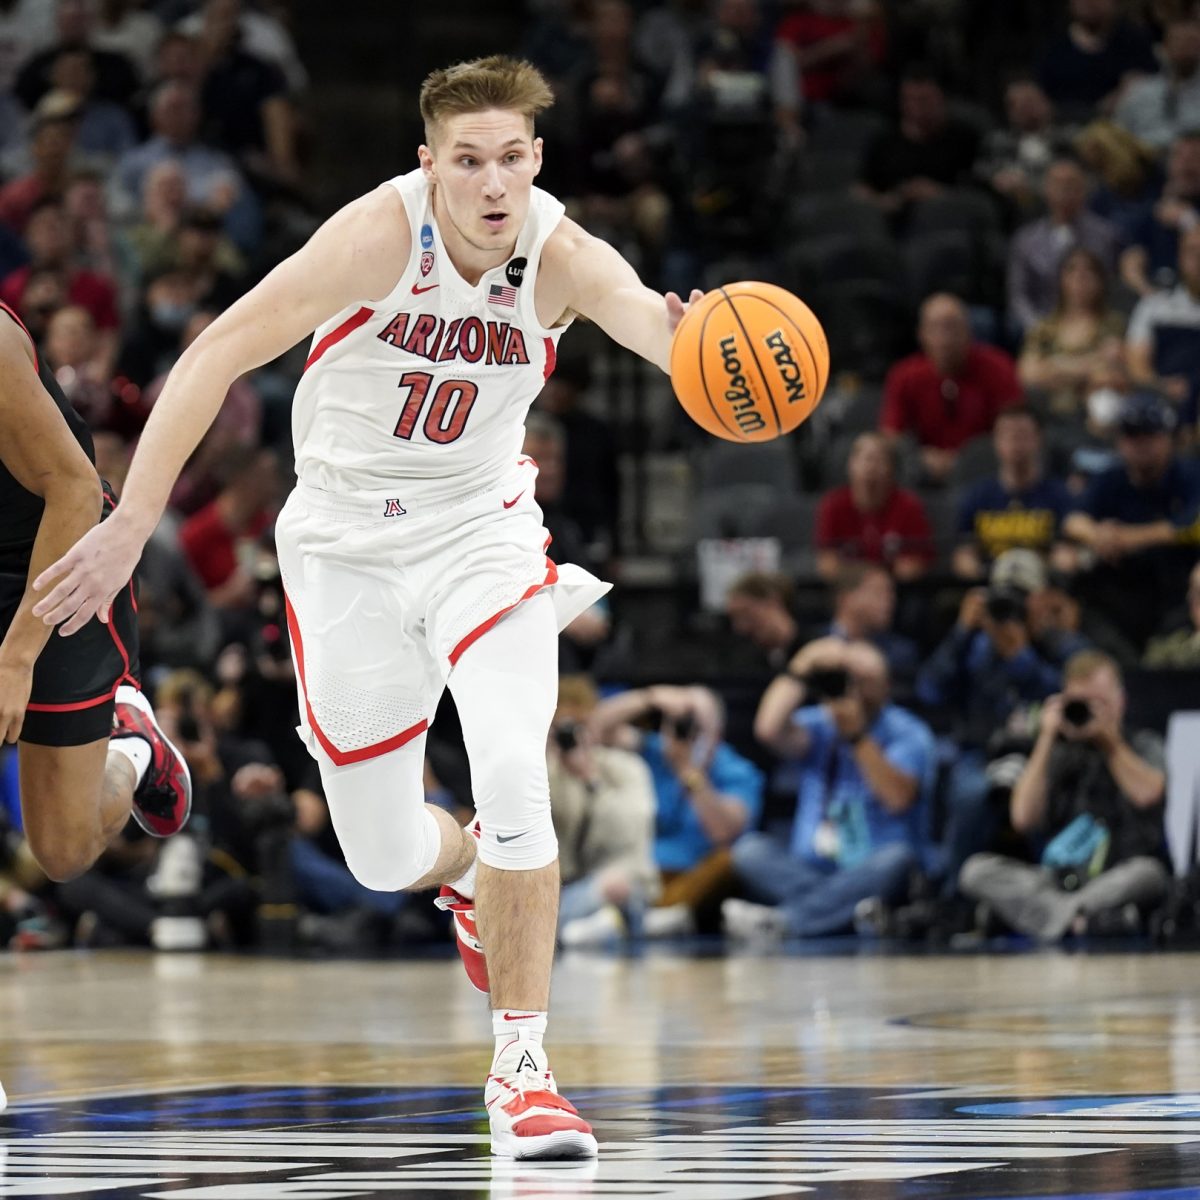 San Diego State vs. Arizona Prediction, Preview, and Odds - 11-22-2022